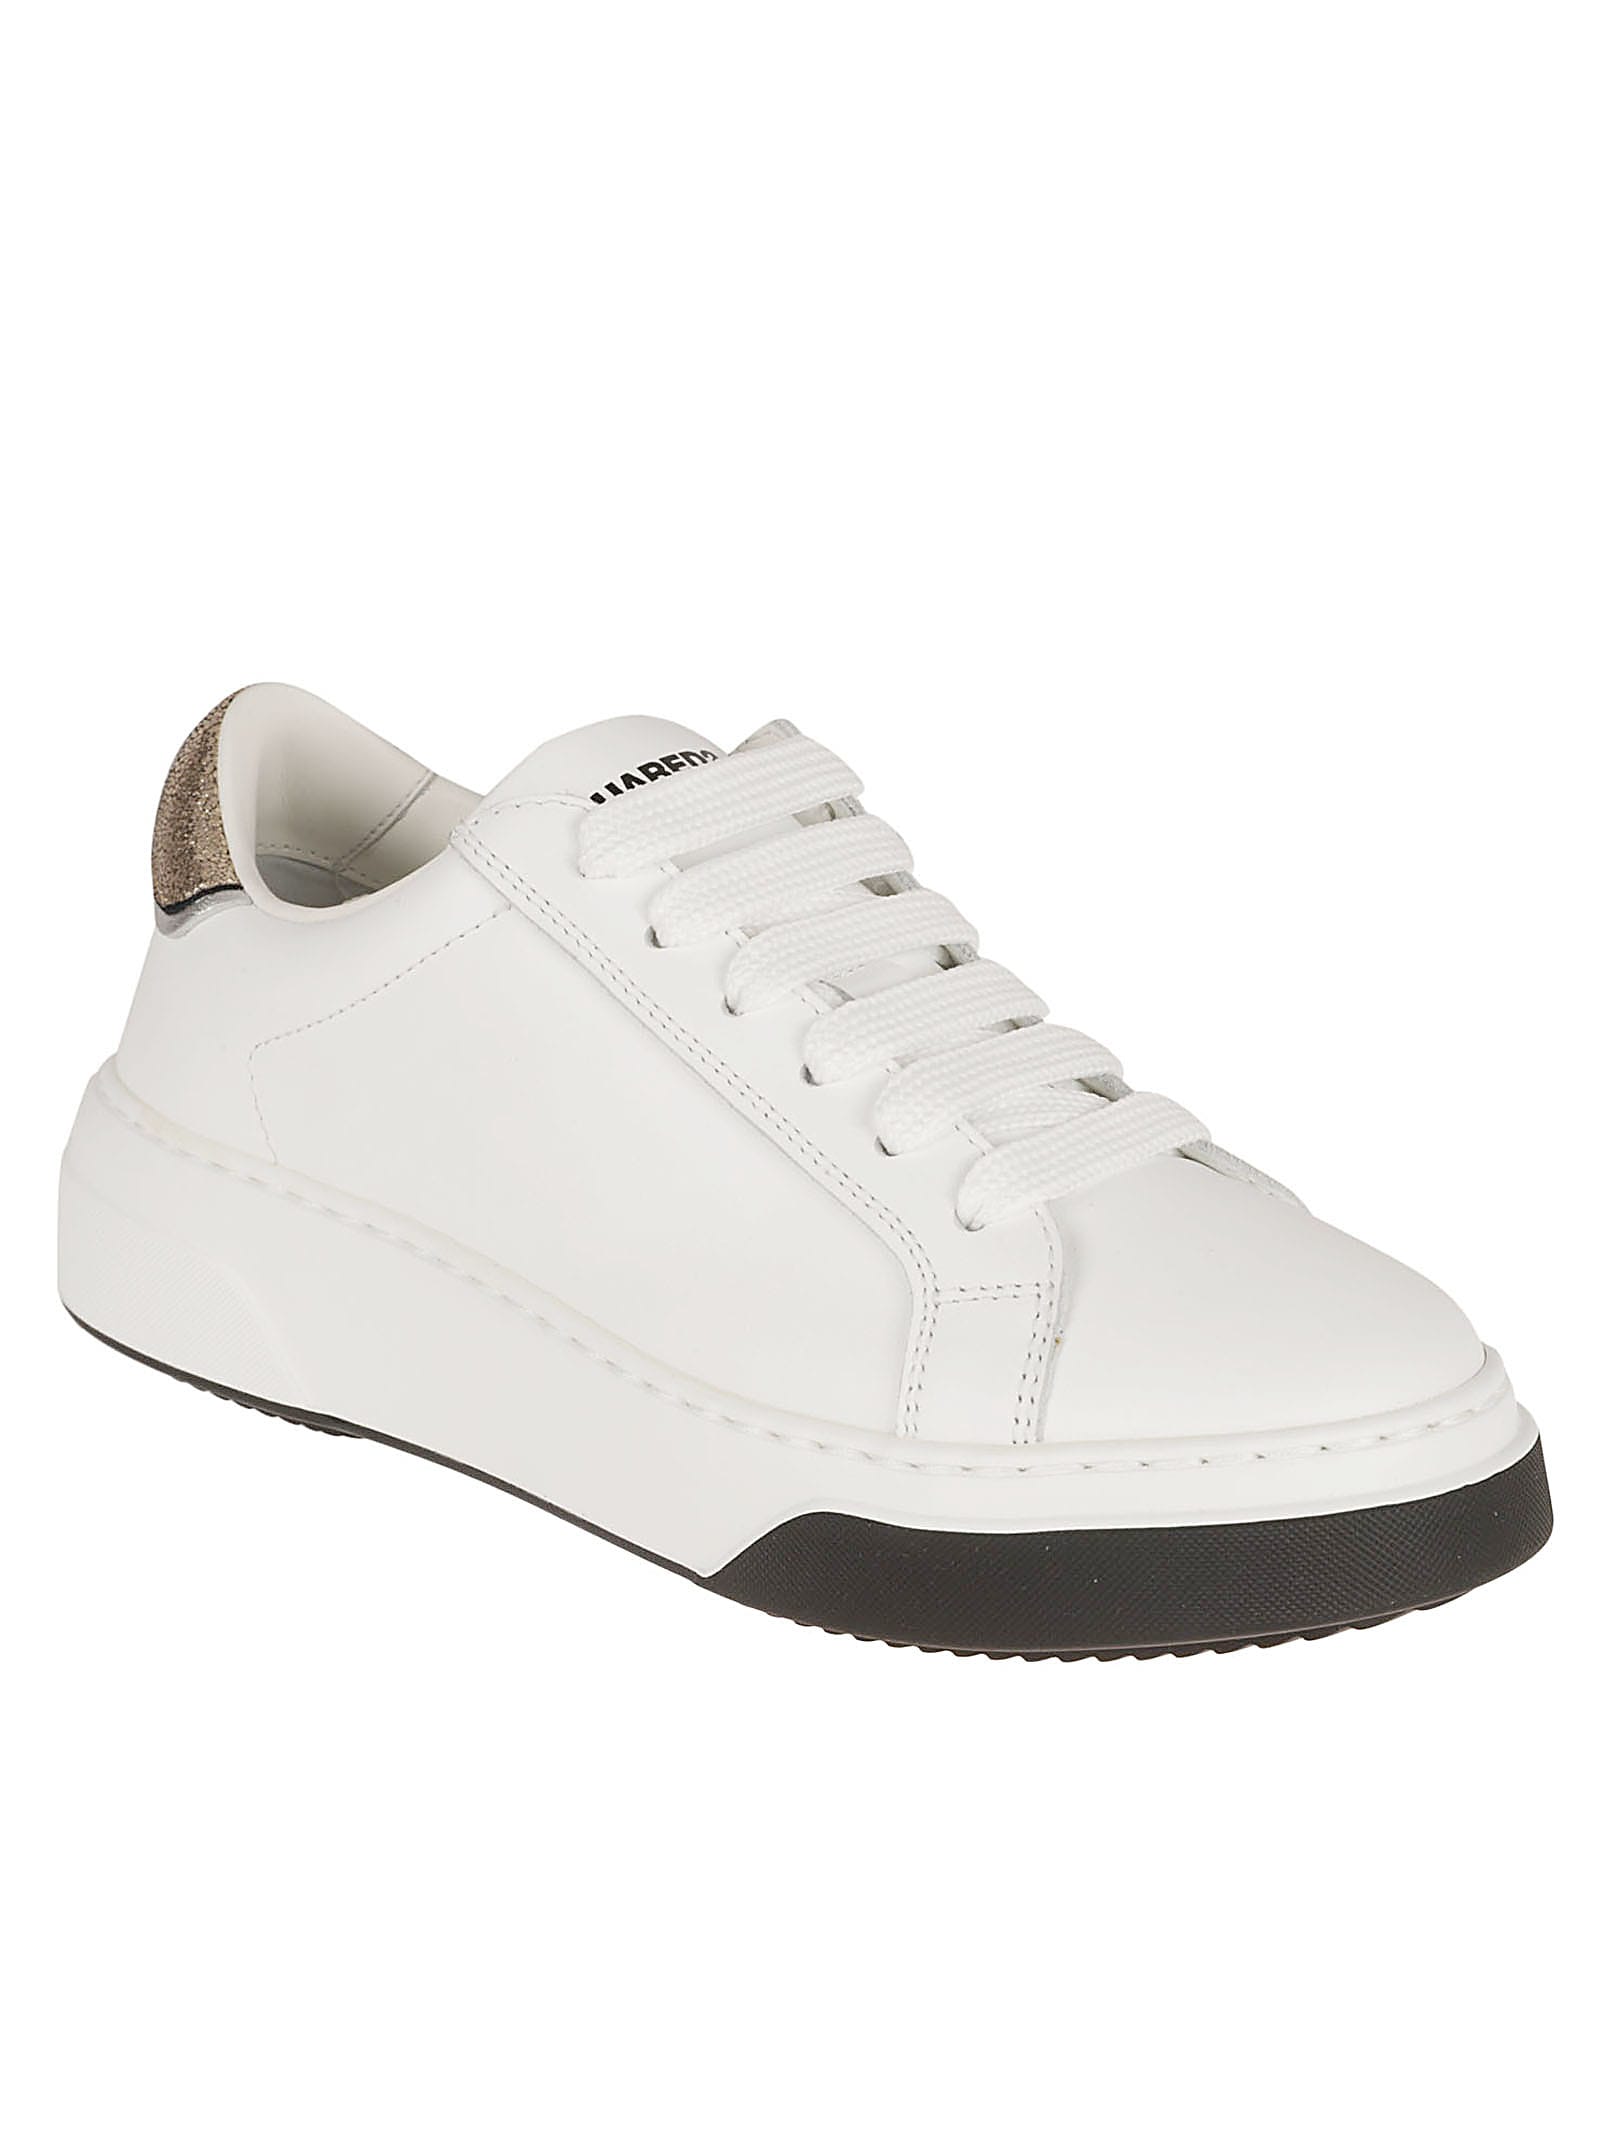 Shop Dsquared2 Bumper Sneakers In White / Gold